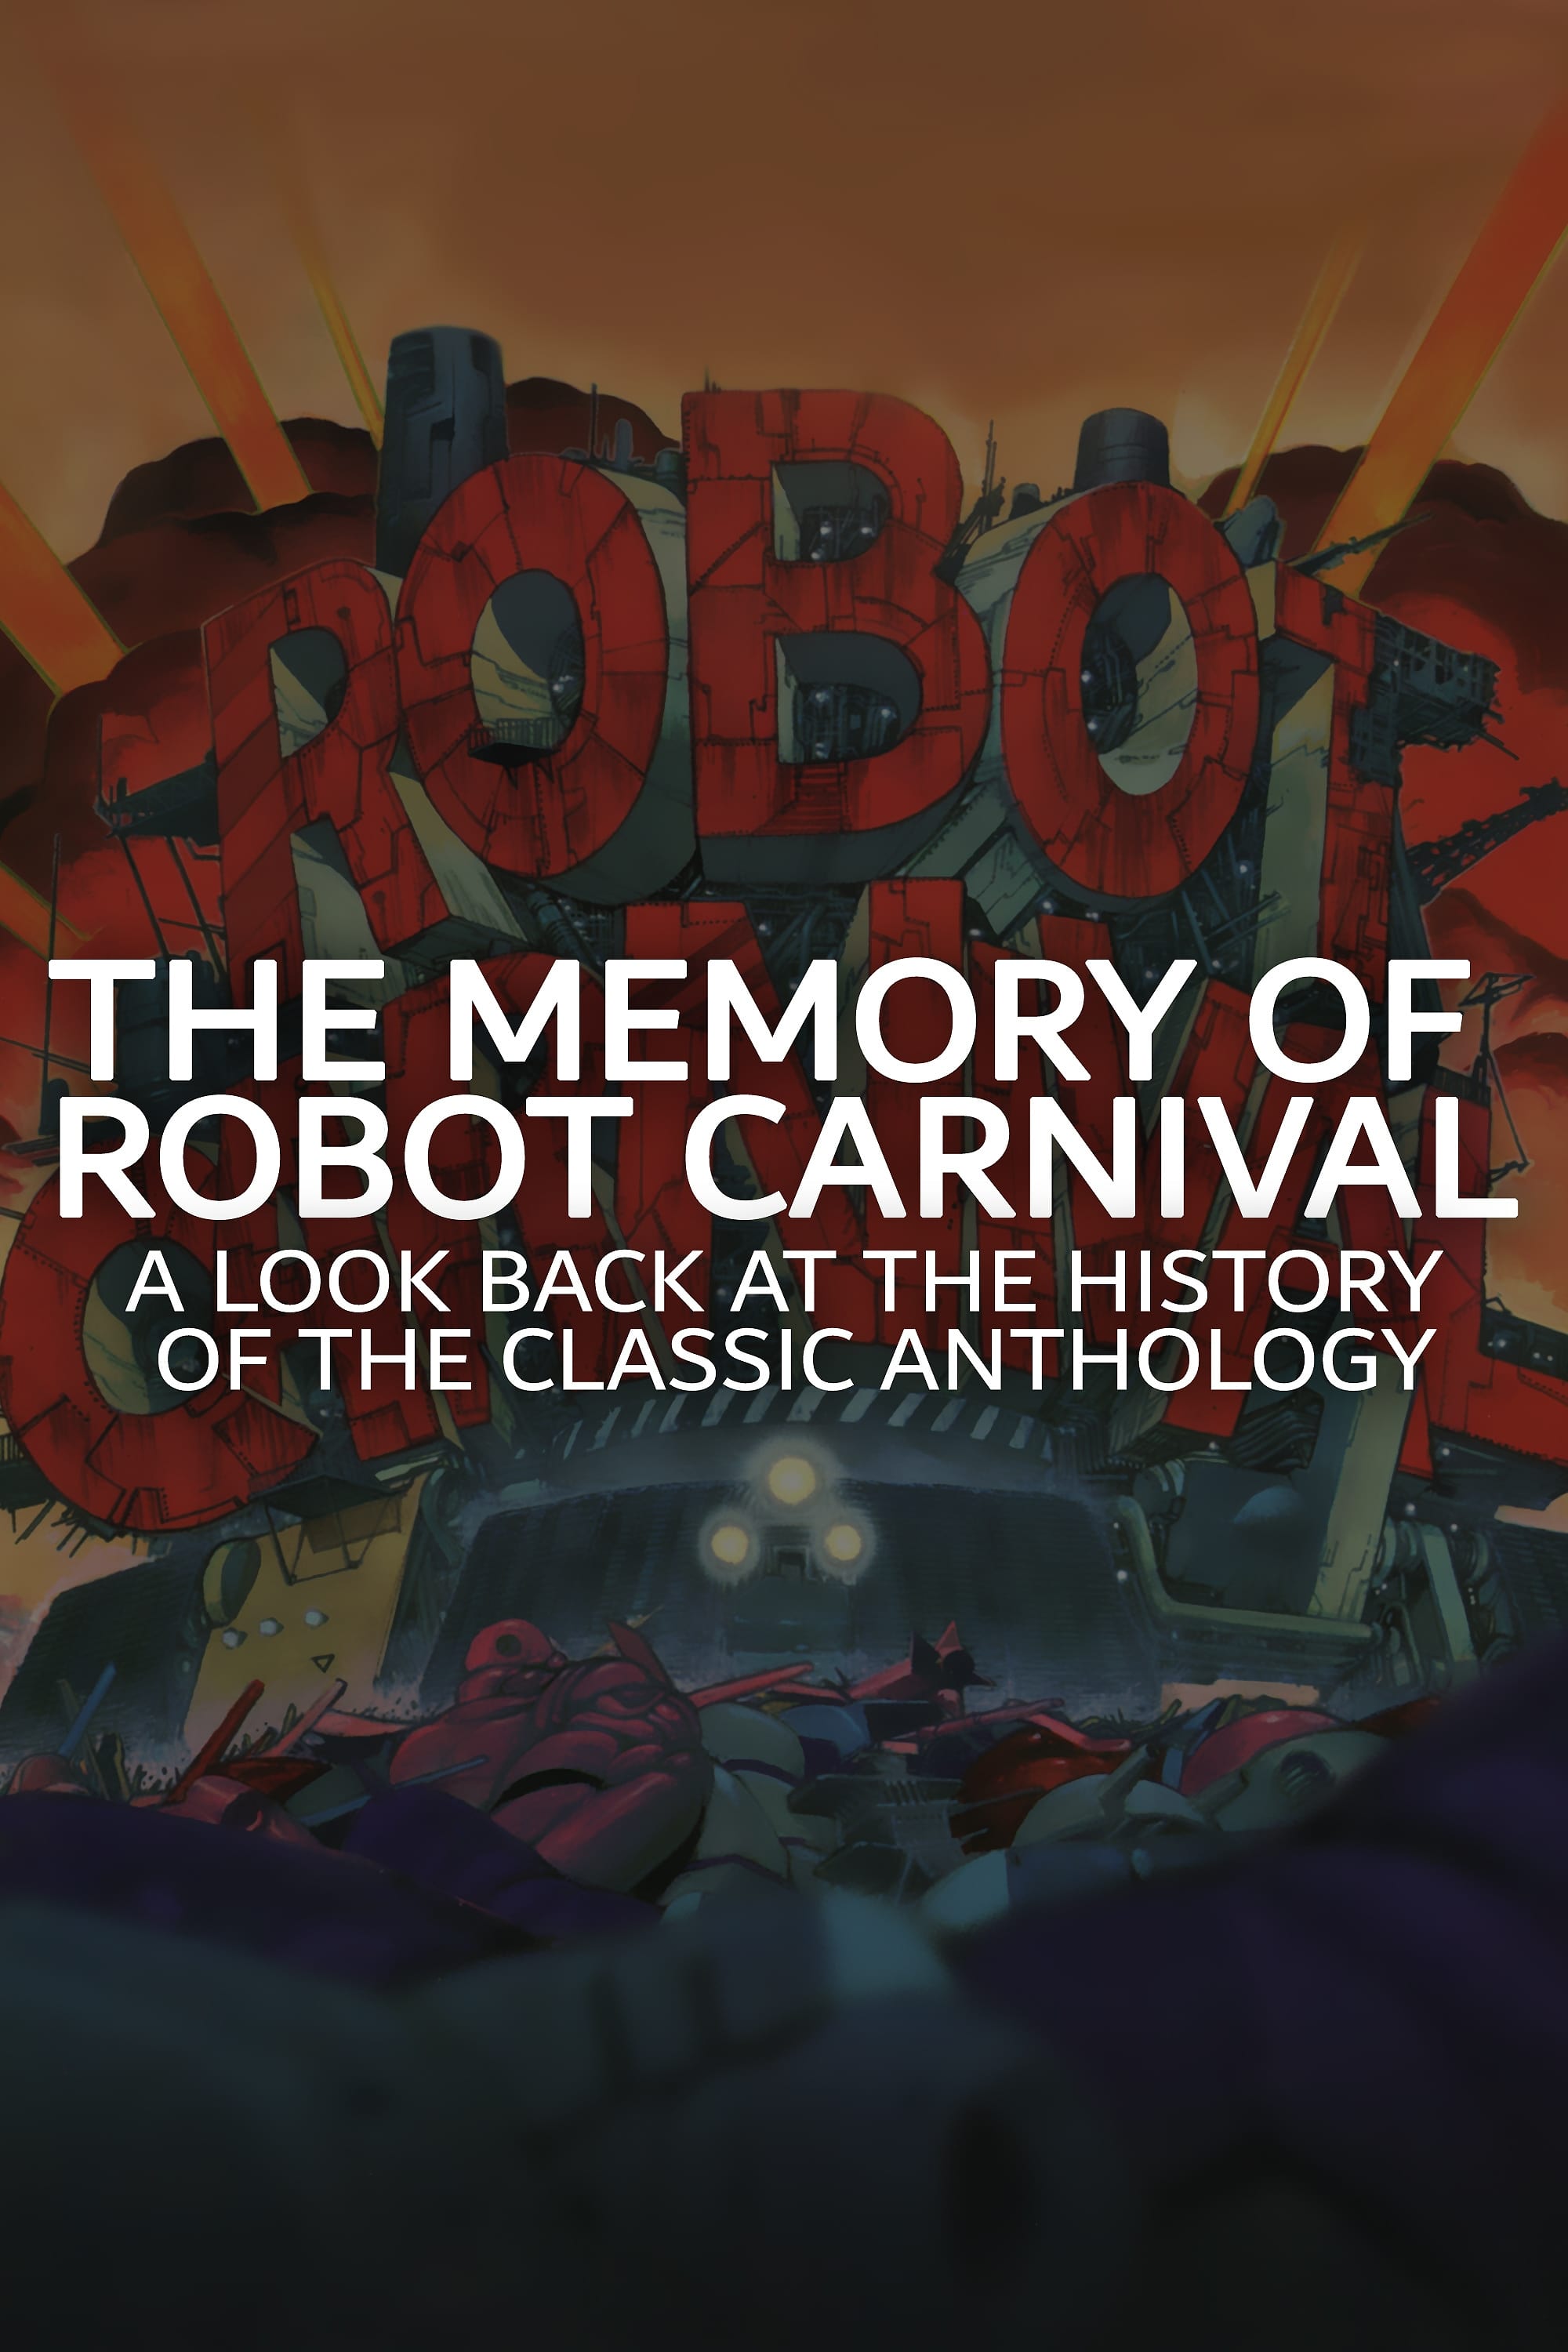 The Memory of Robot Carnival: A Look Back at the History of the Classic Anthology